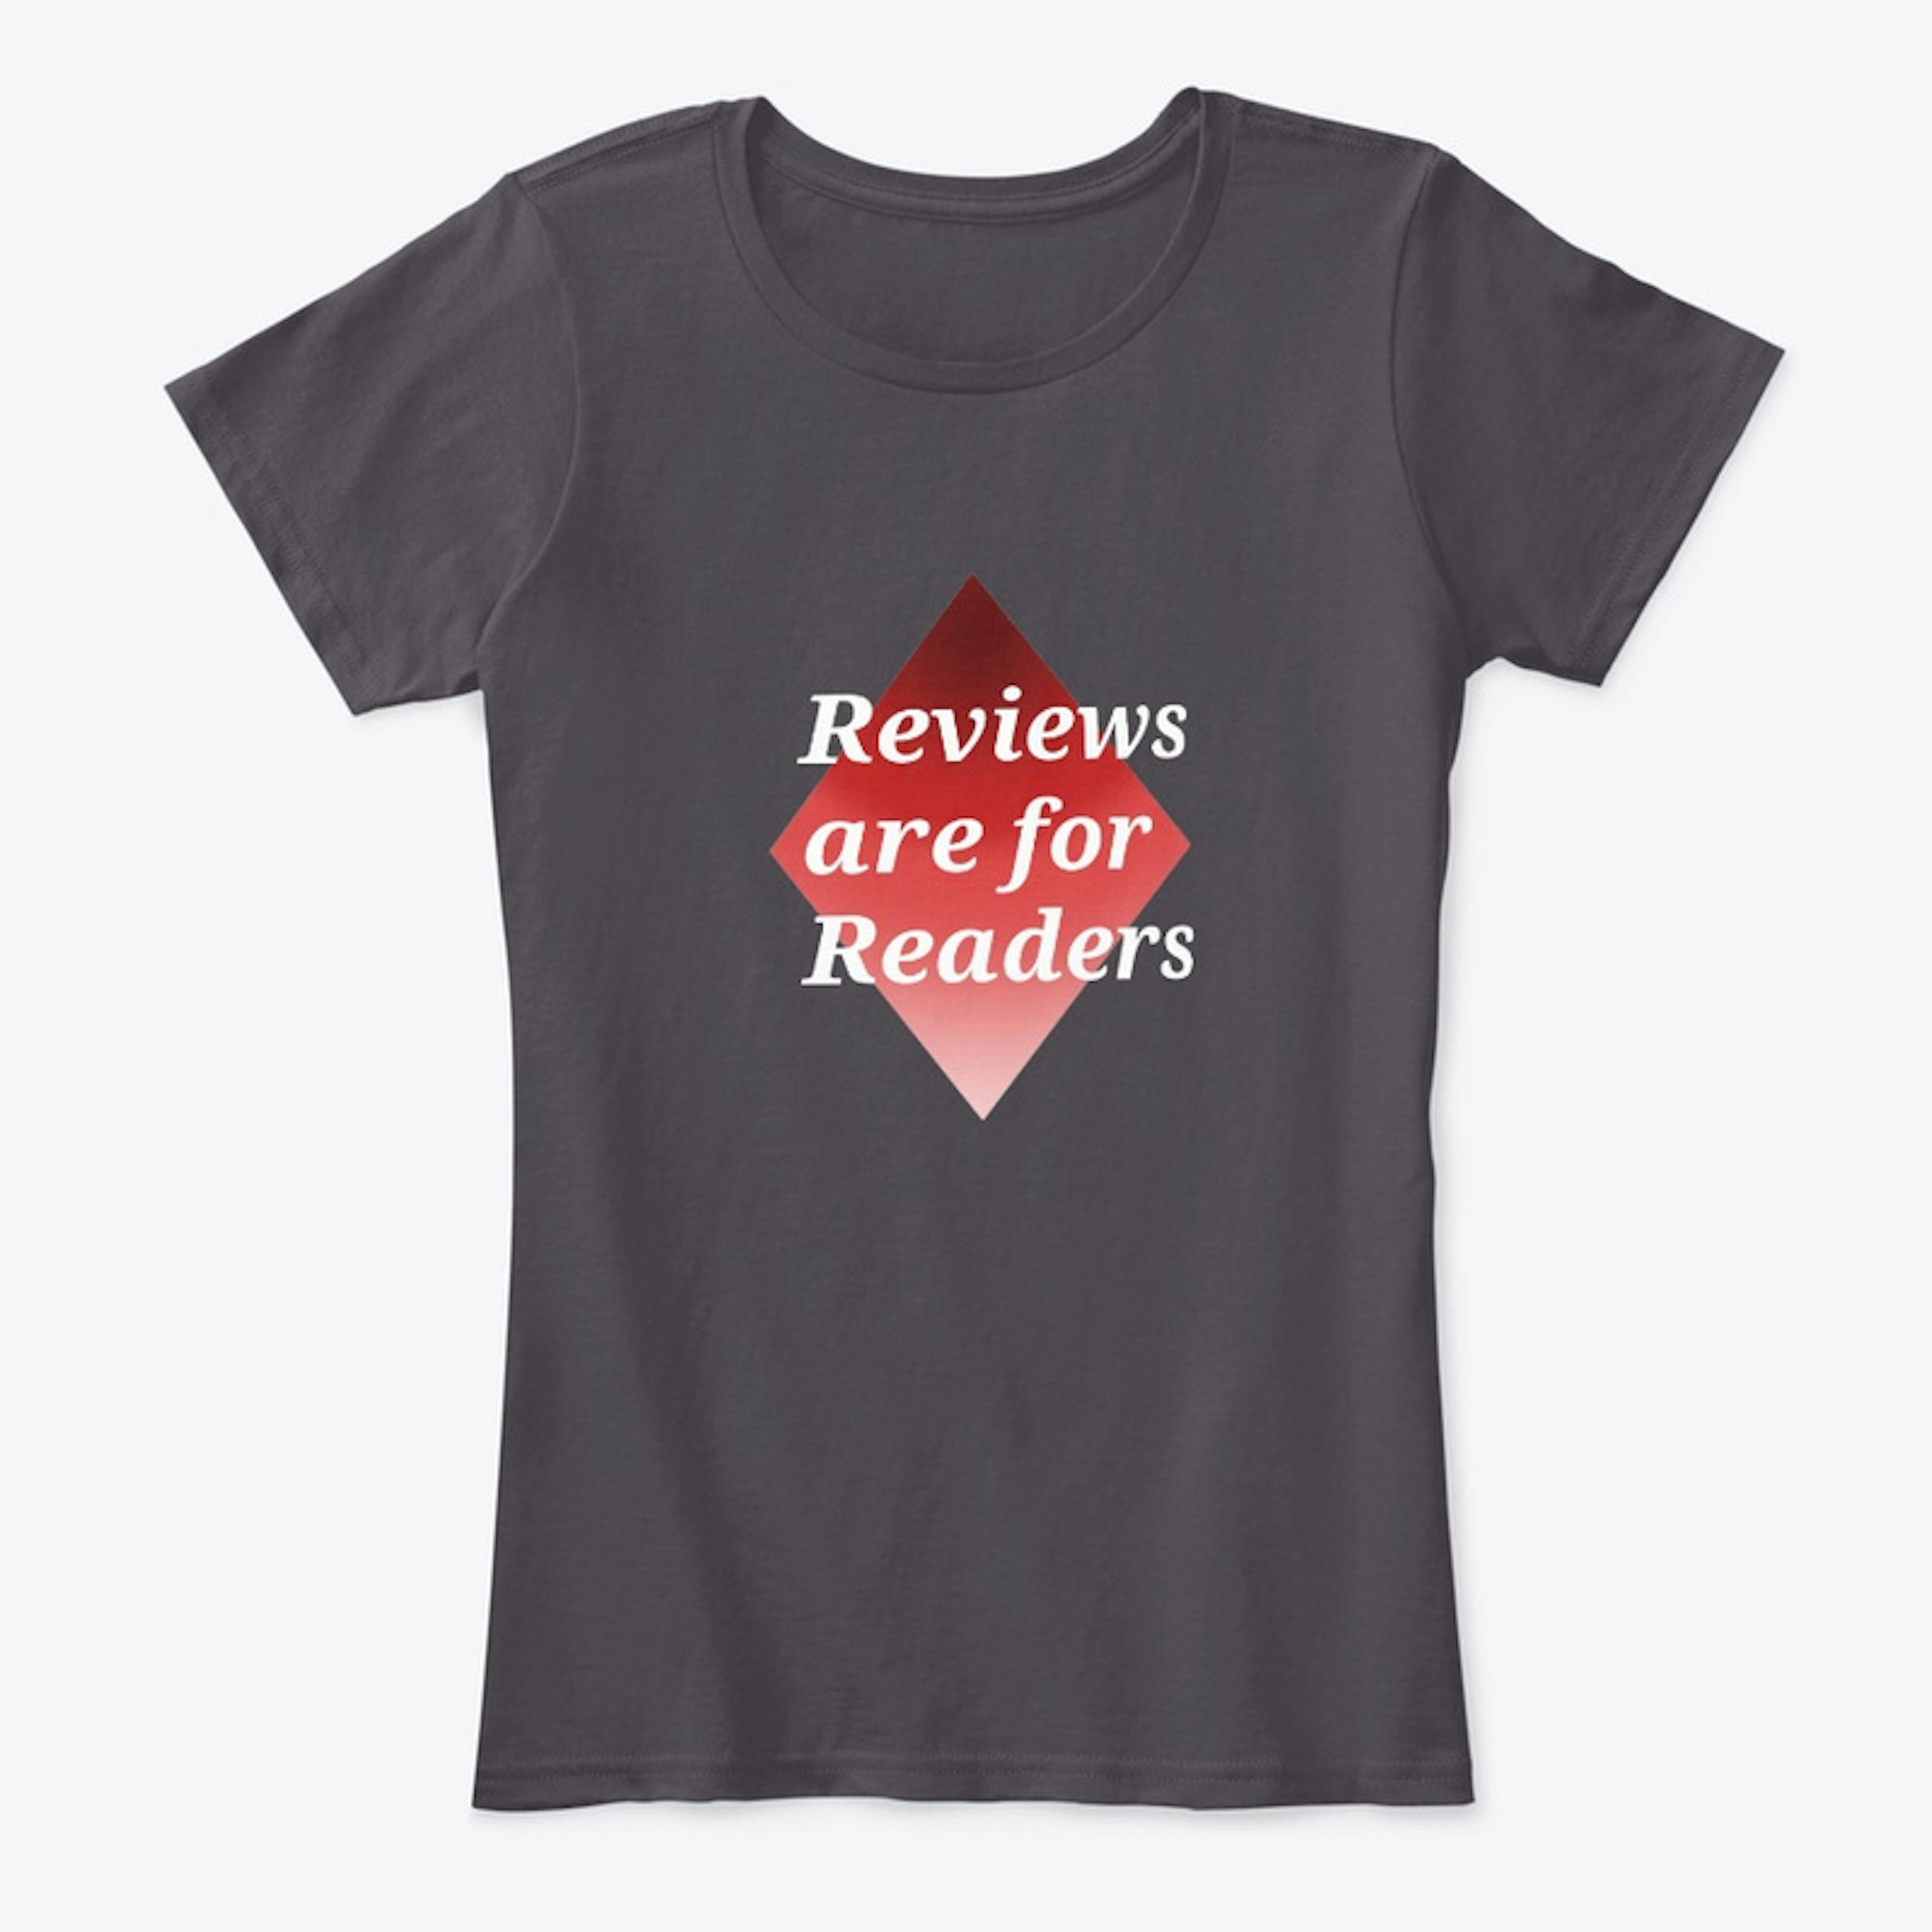 Reviews are for readers